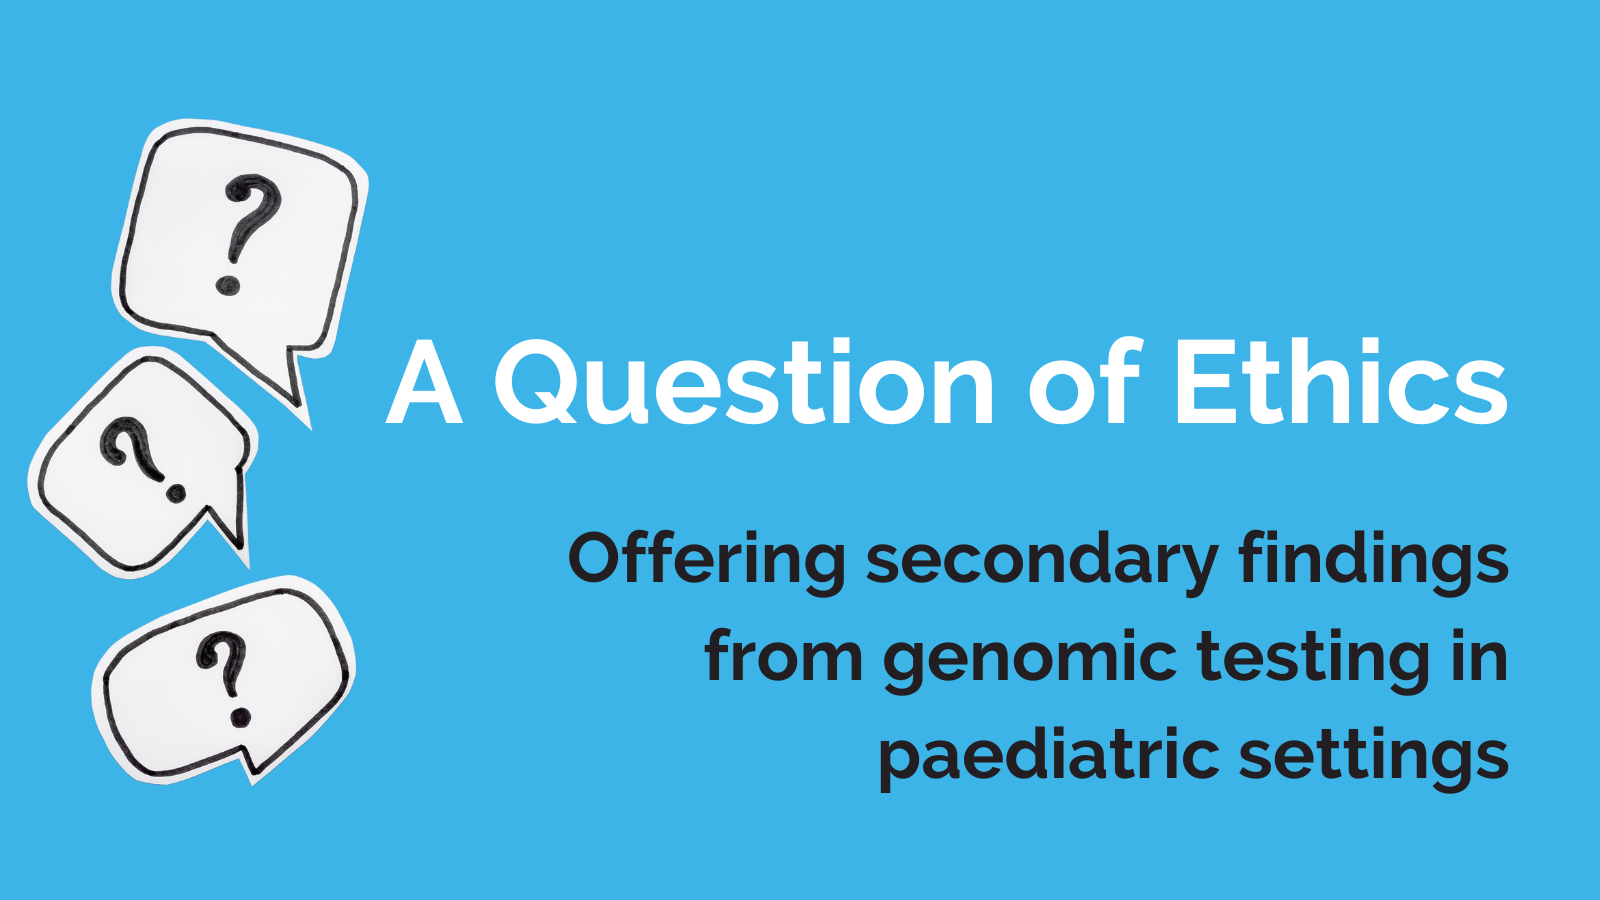 A Question of Ethics blog part 3. Offering secondary findings from genomic testing in paediatric settings.